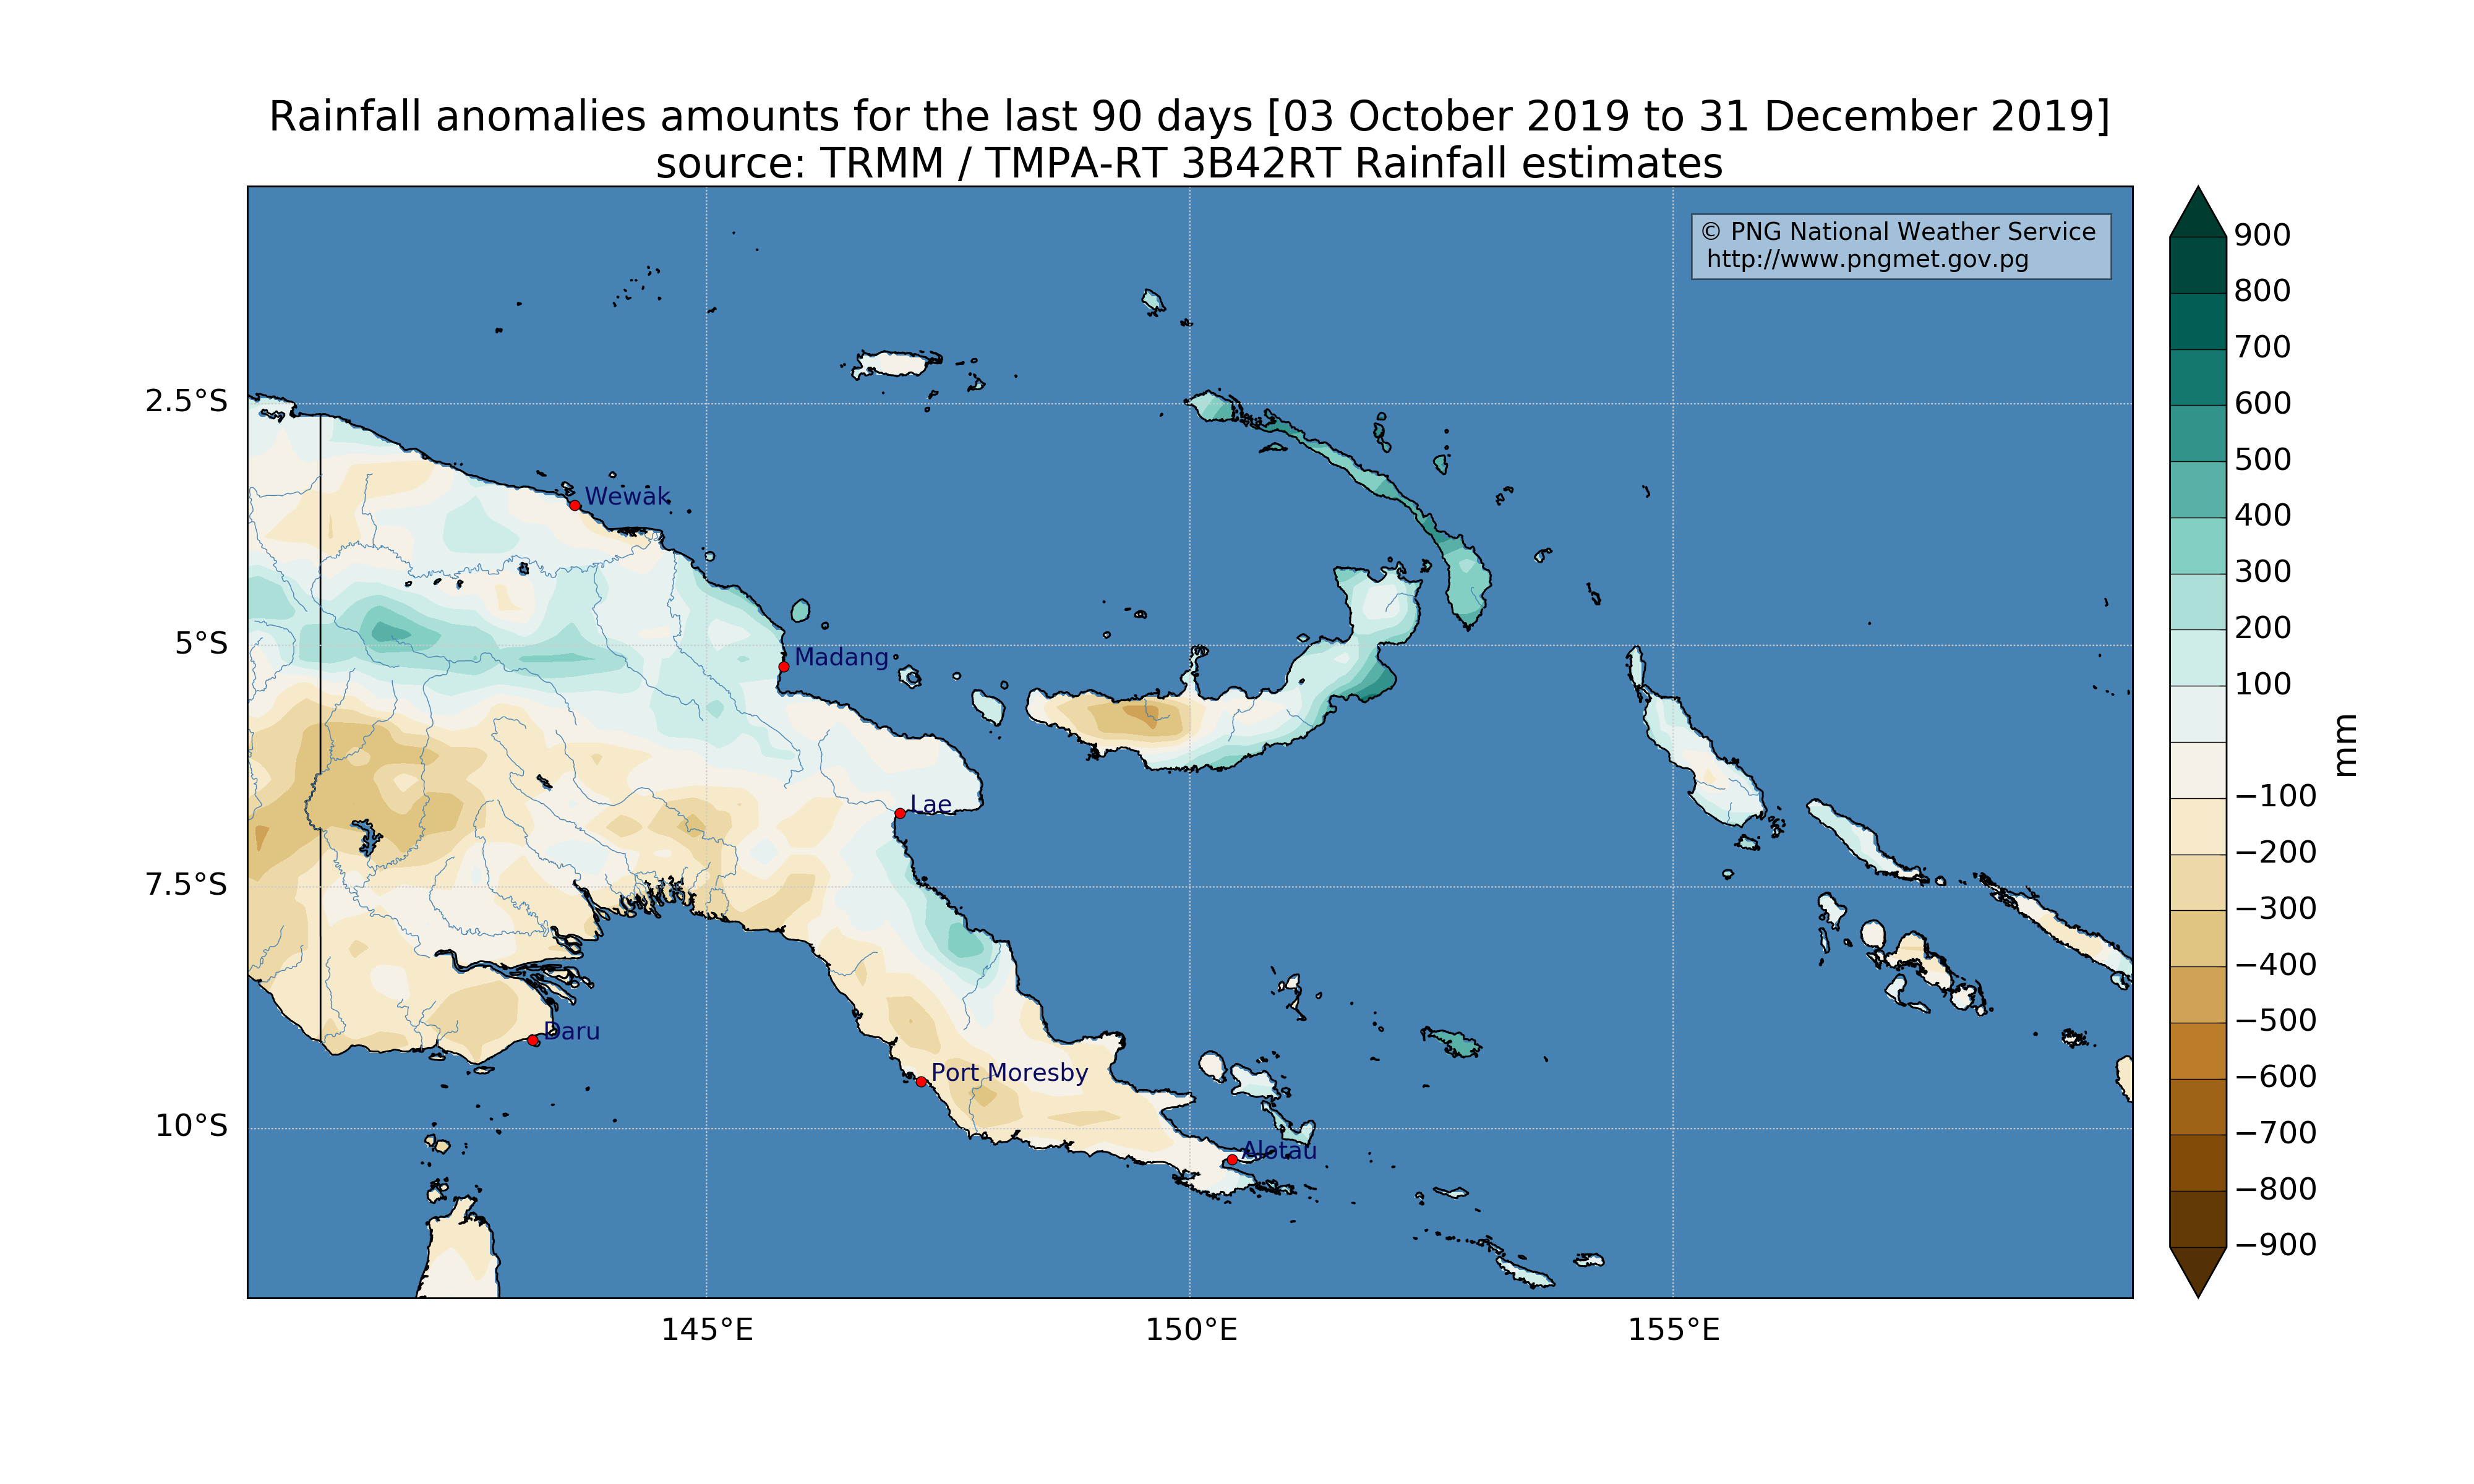 anomalies (in mm/day) for the last 90 days